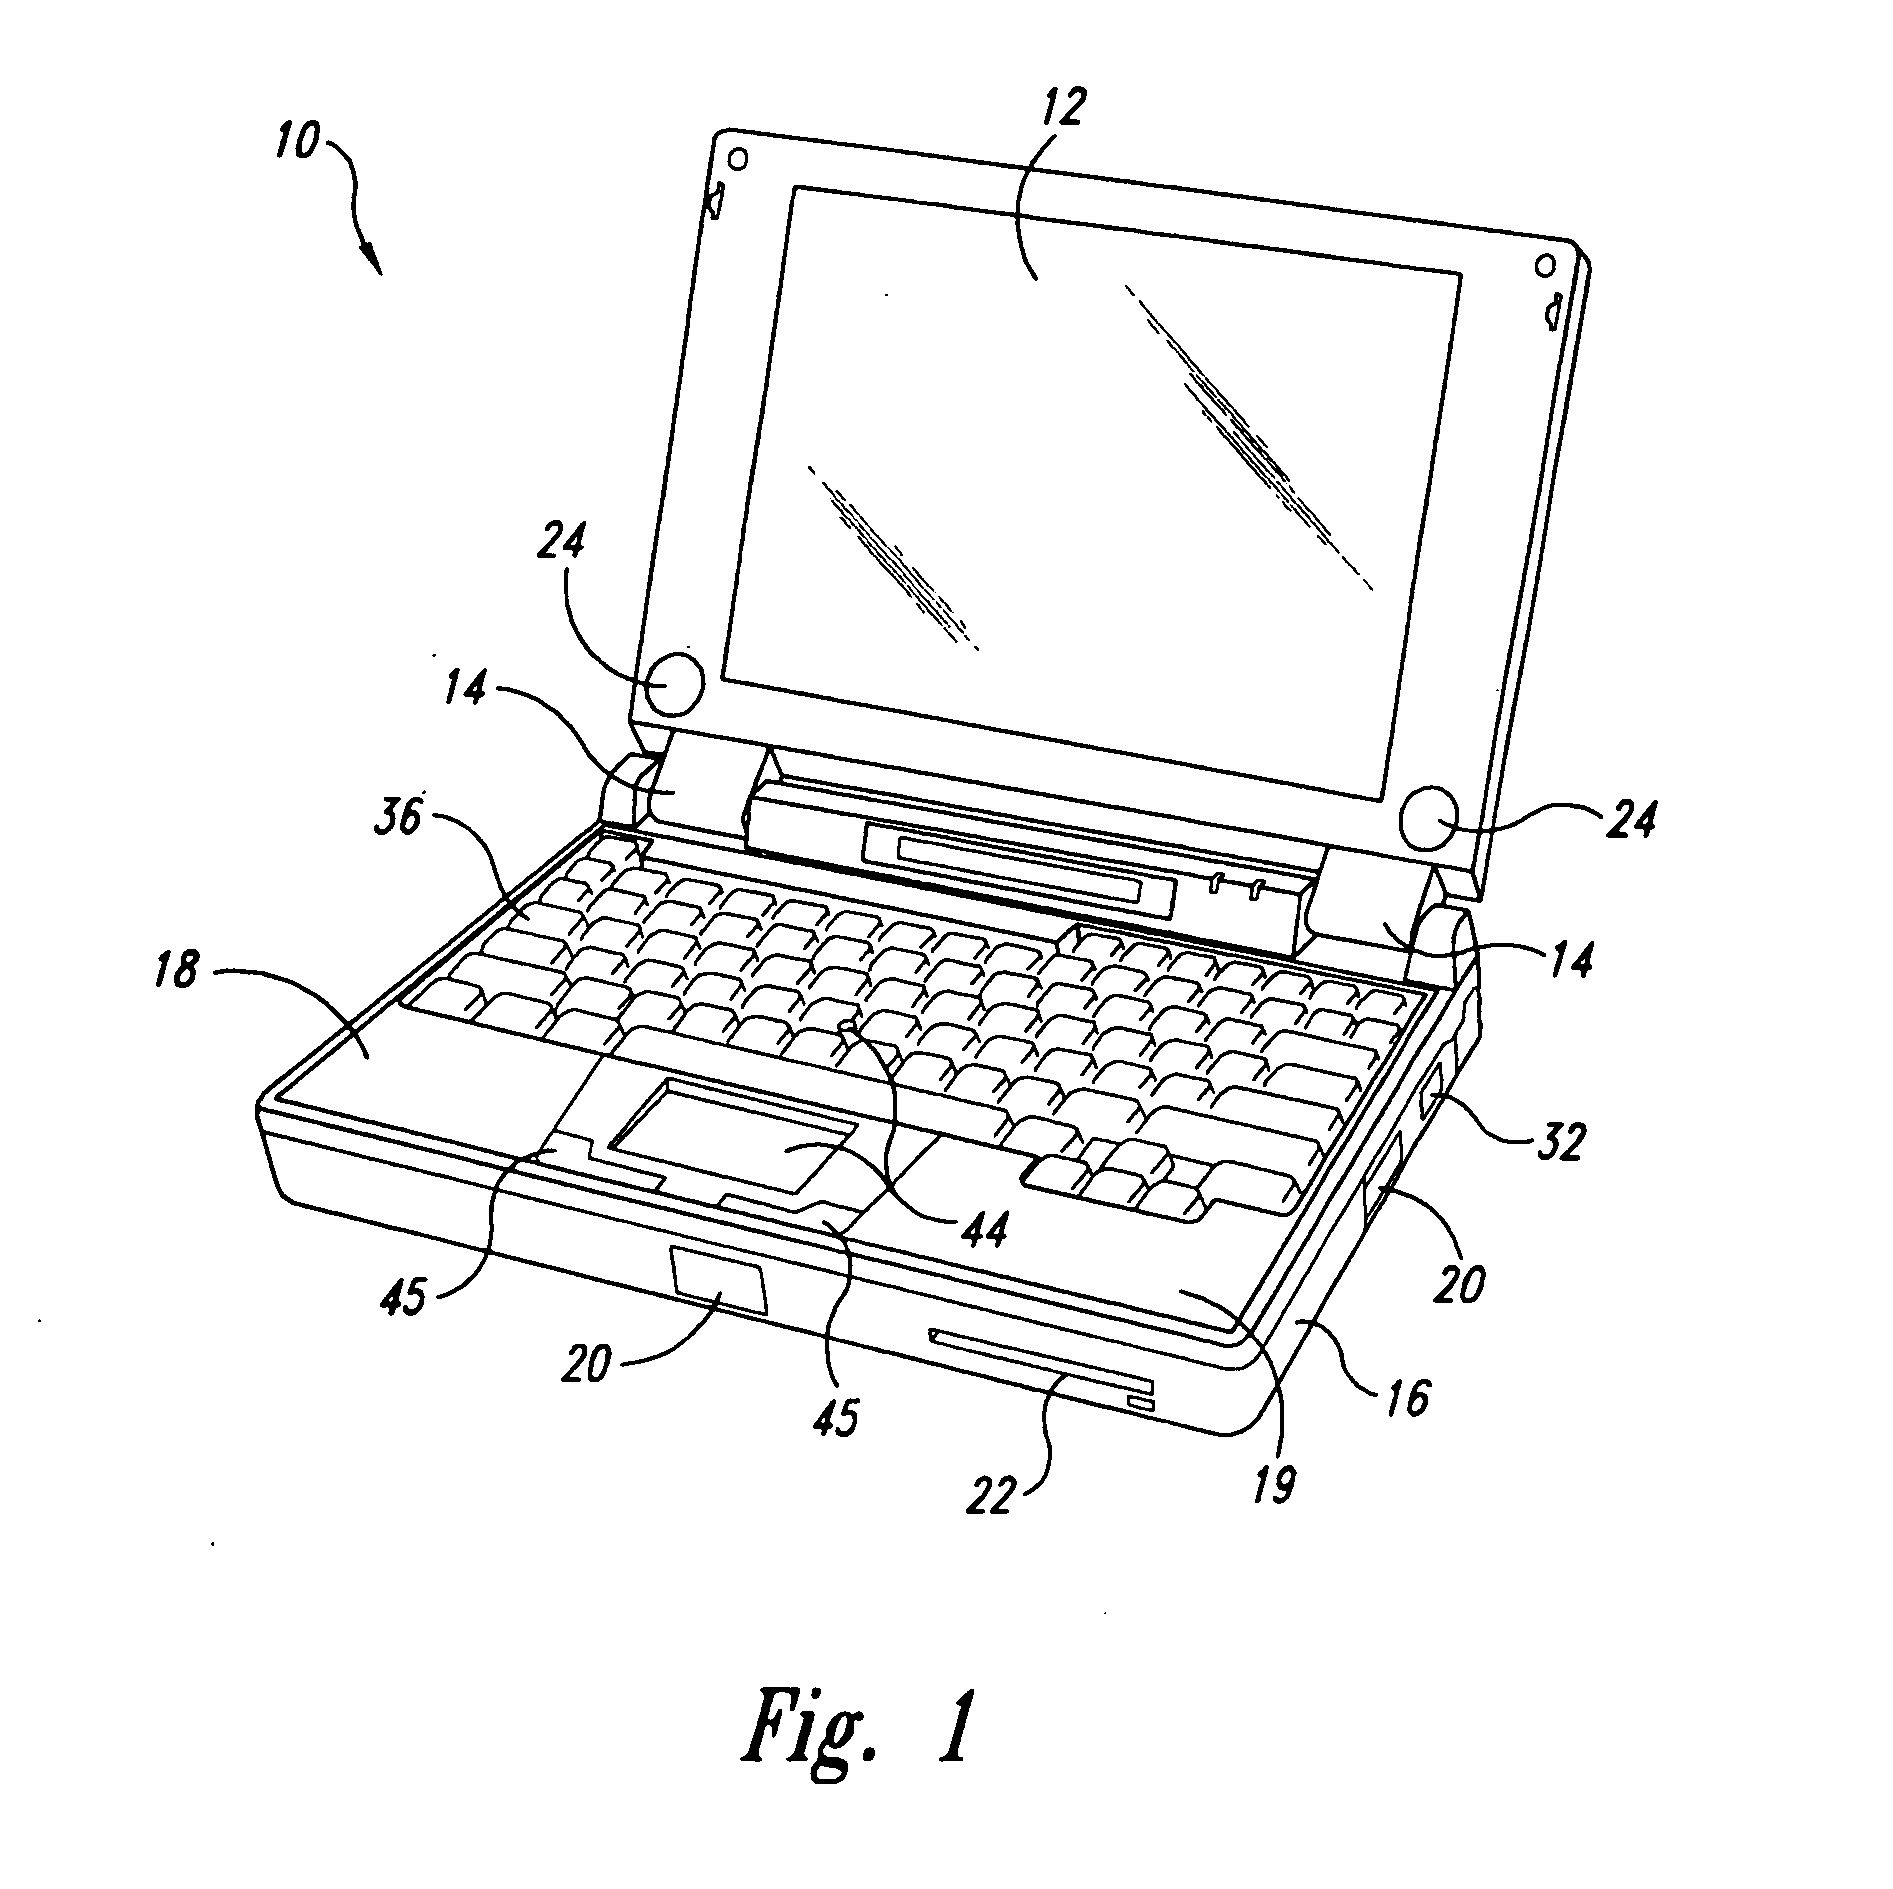 Portable input device for computer